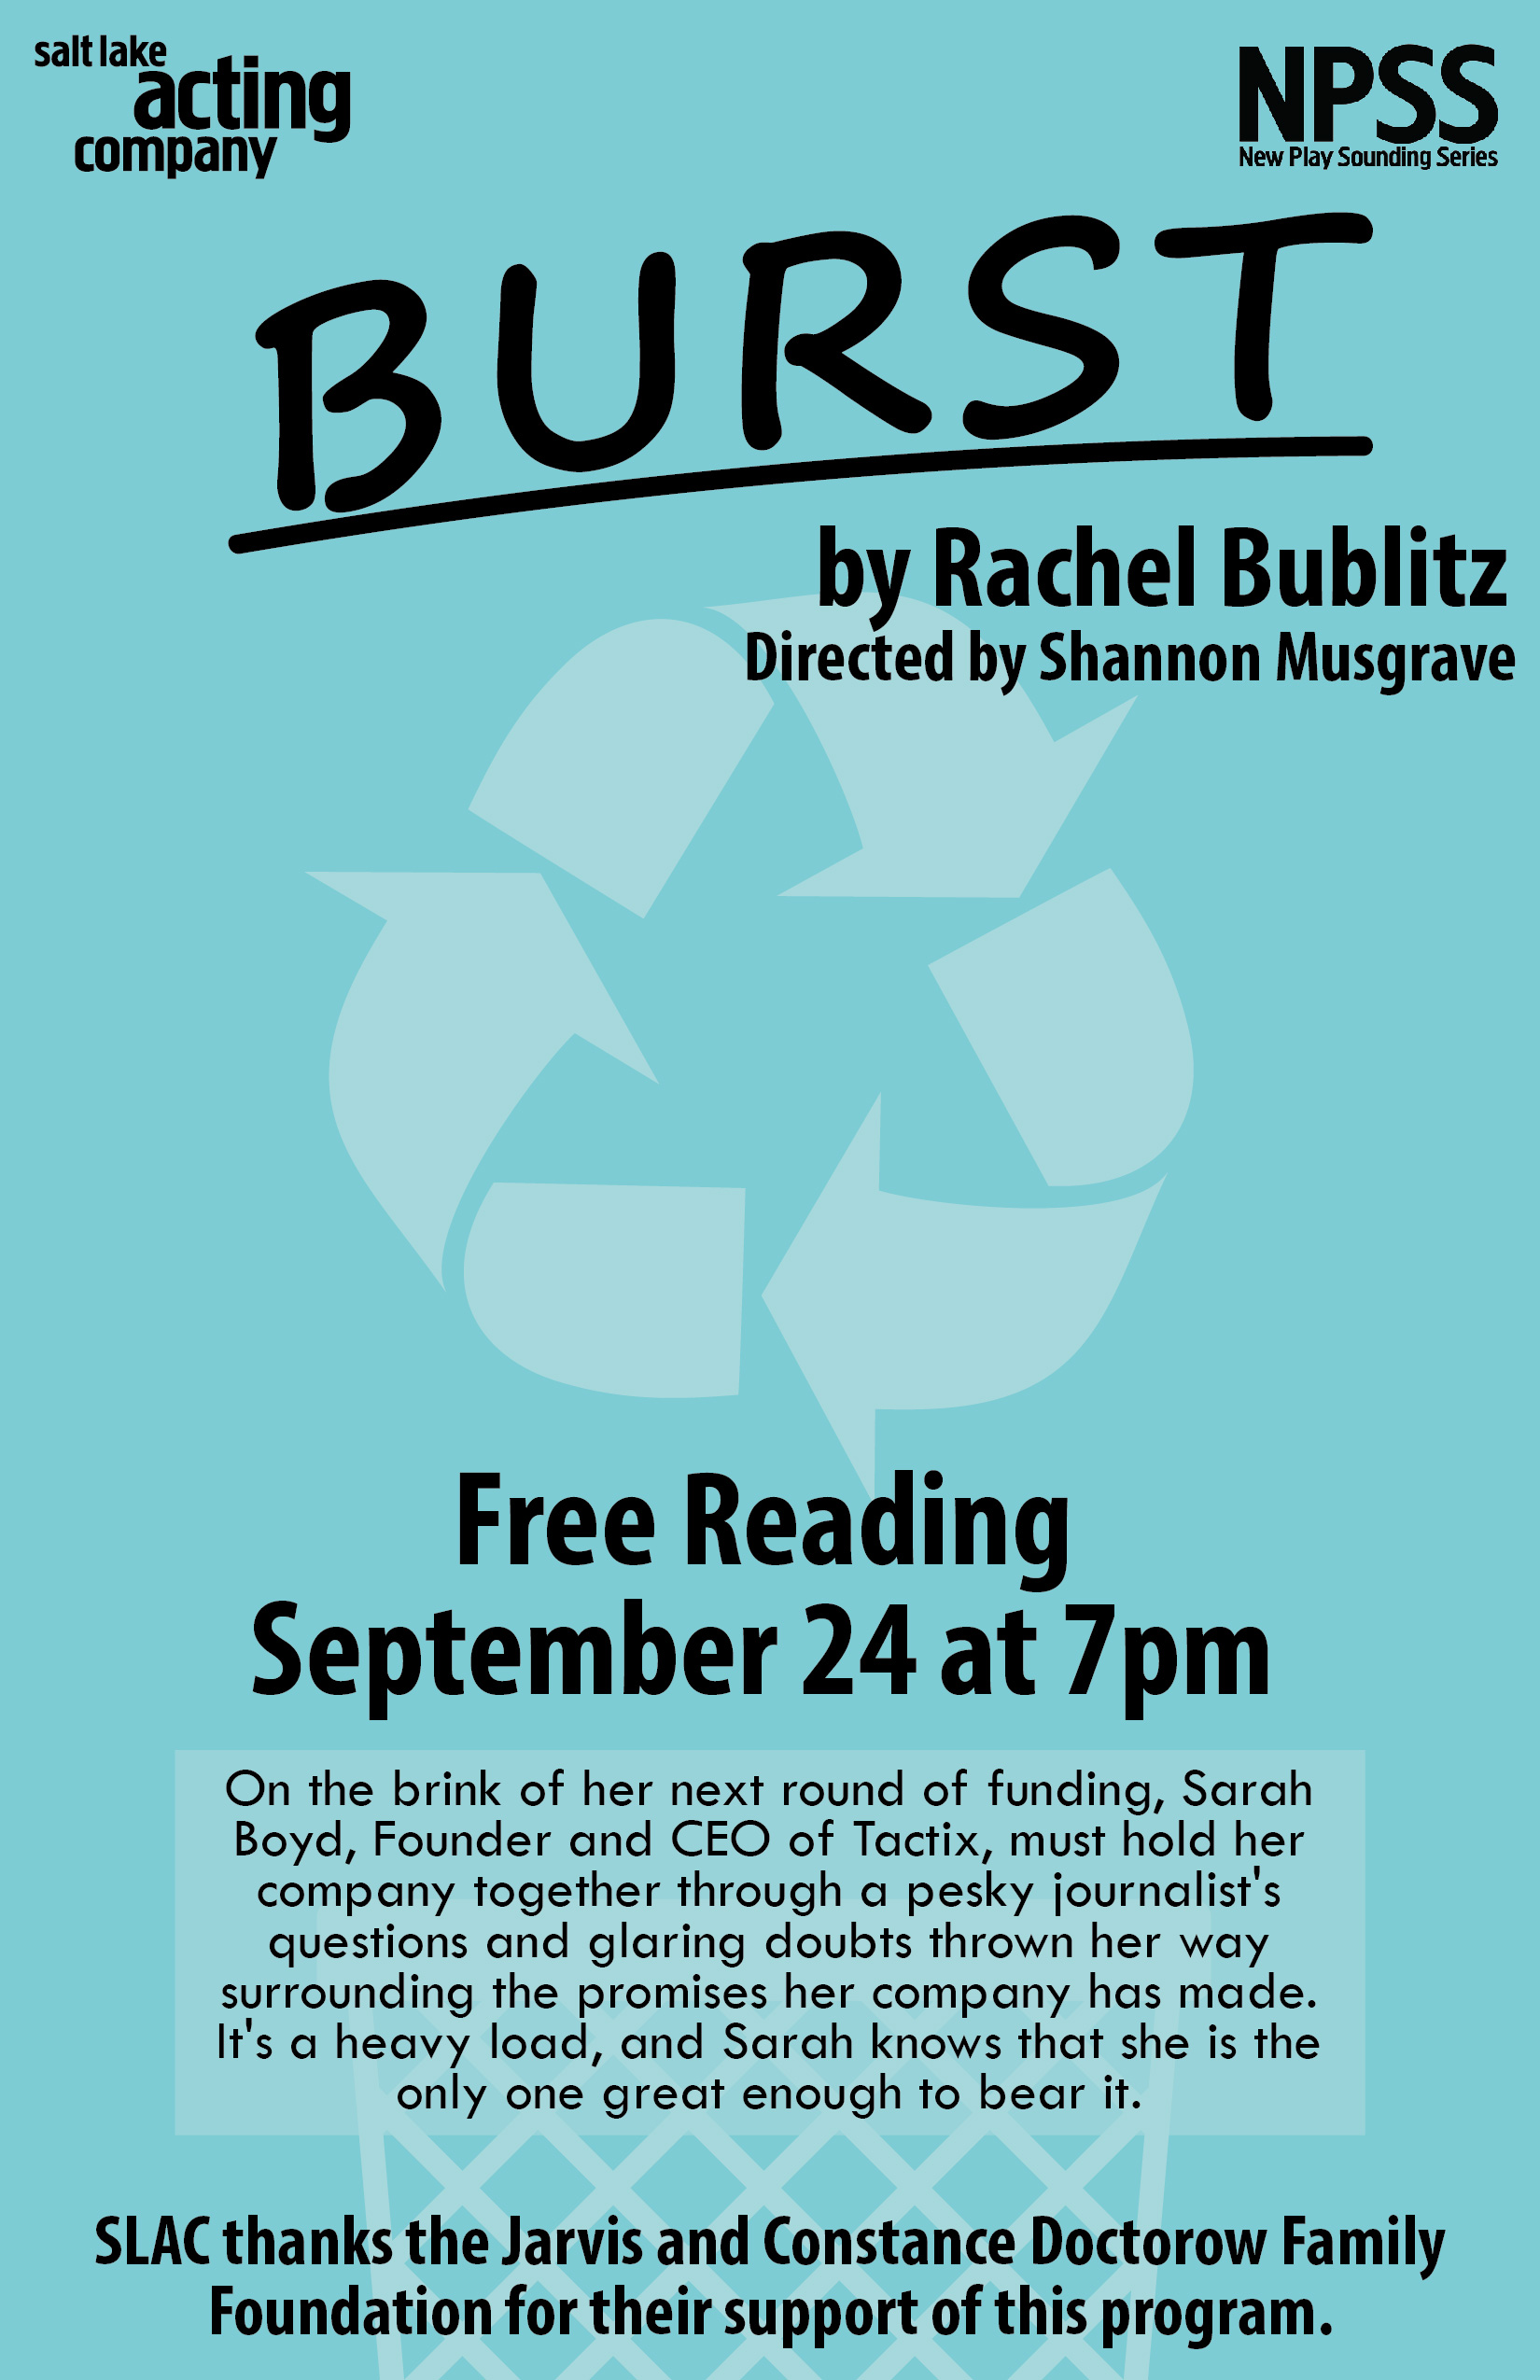 Poster for the BURST reading at Salt Lake Acting Company.